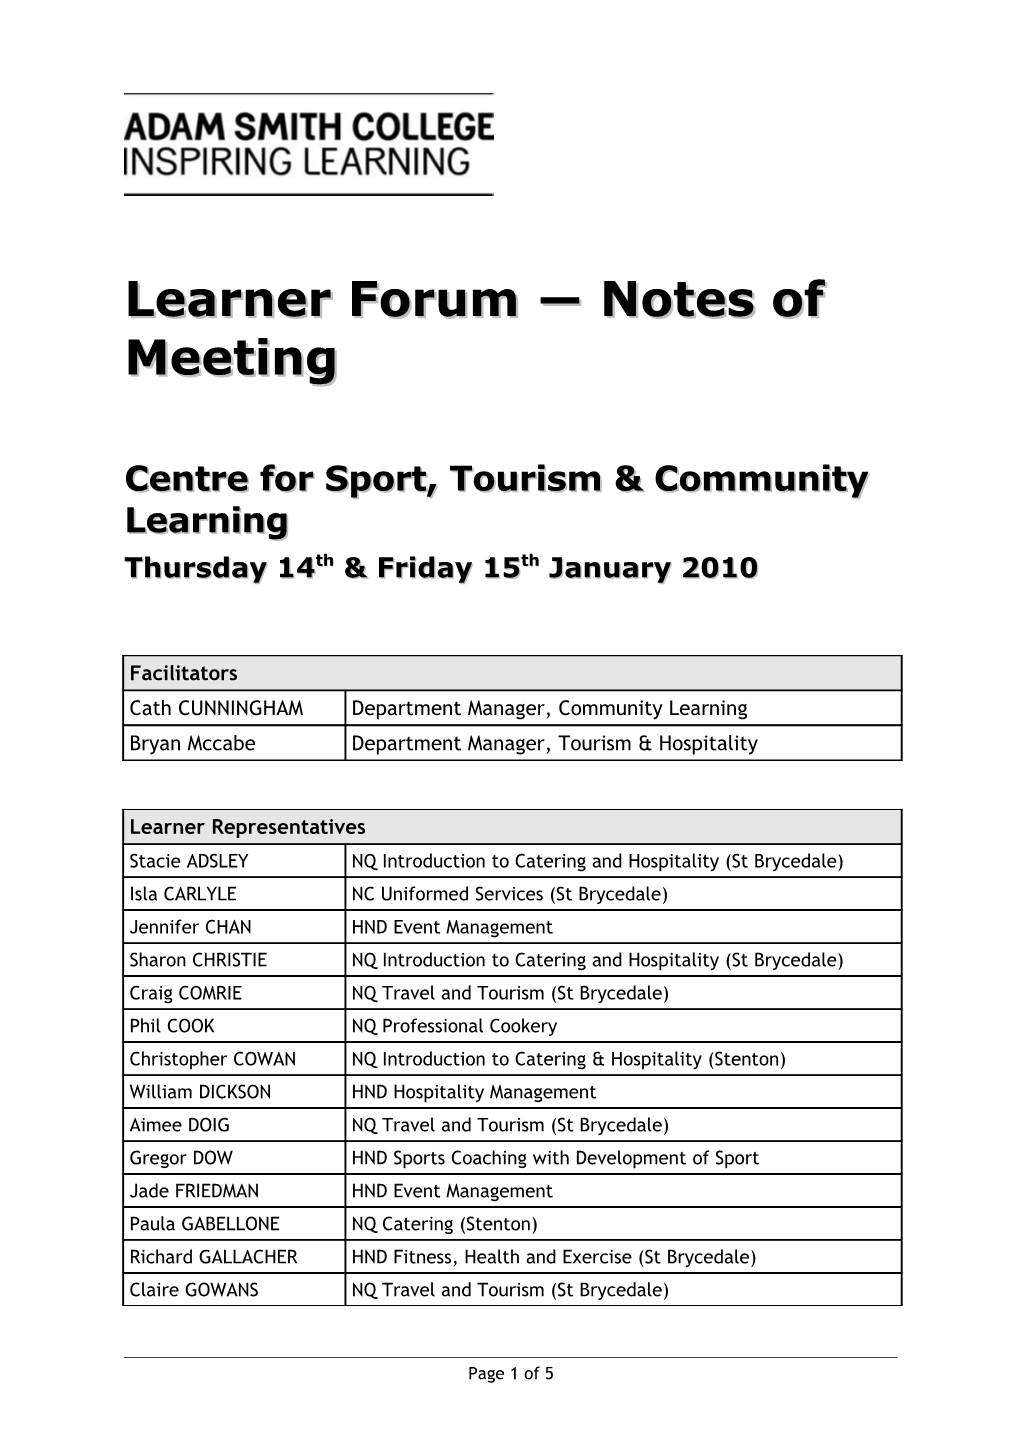 Learner Forum Notes of Meeting - Centre for Sport, Tourism and Community Learning - February